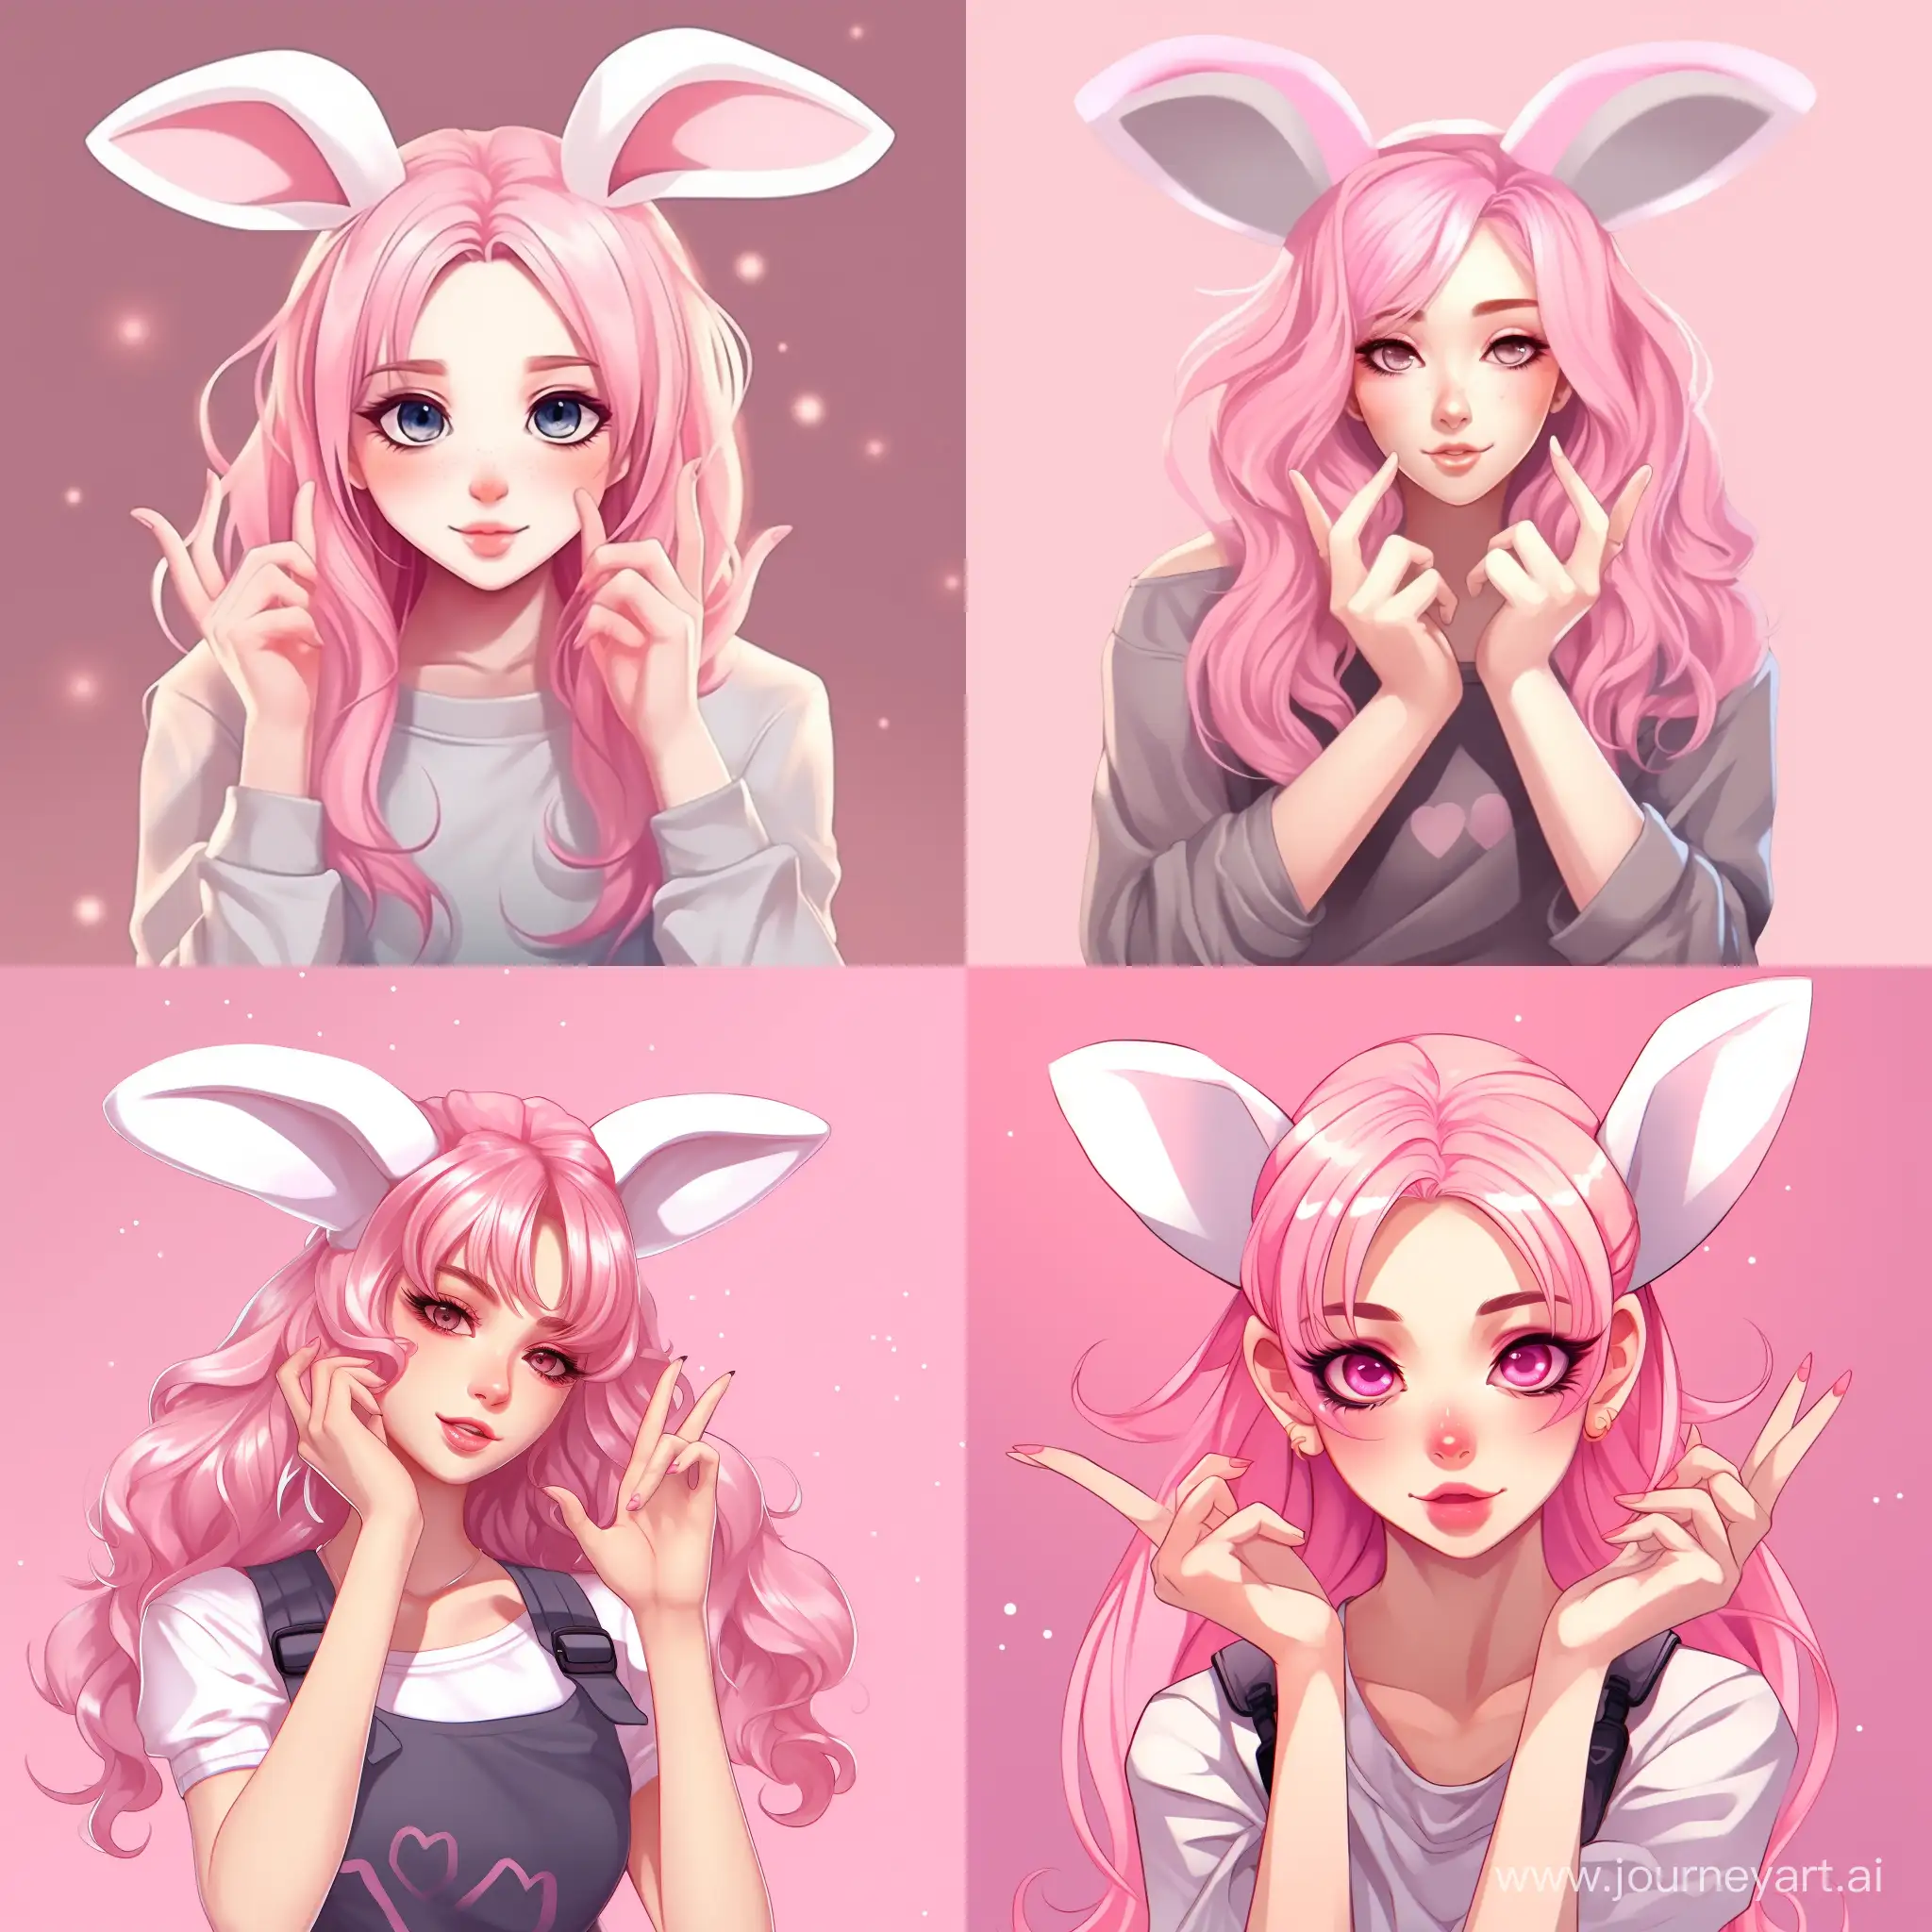 Adorable-PinkHaired-Girl-with-Bunny-Ears-Cute-Cartoon-Gesture-in-Pastel-Pink